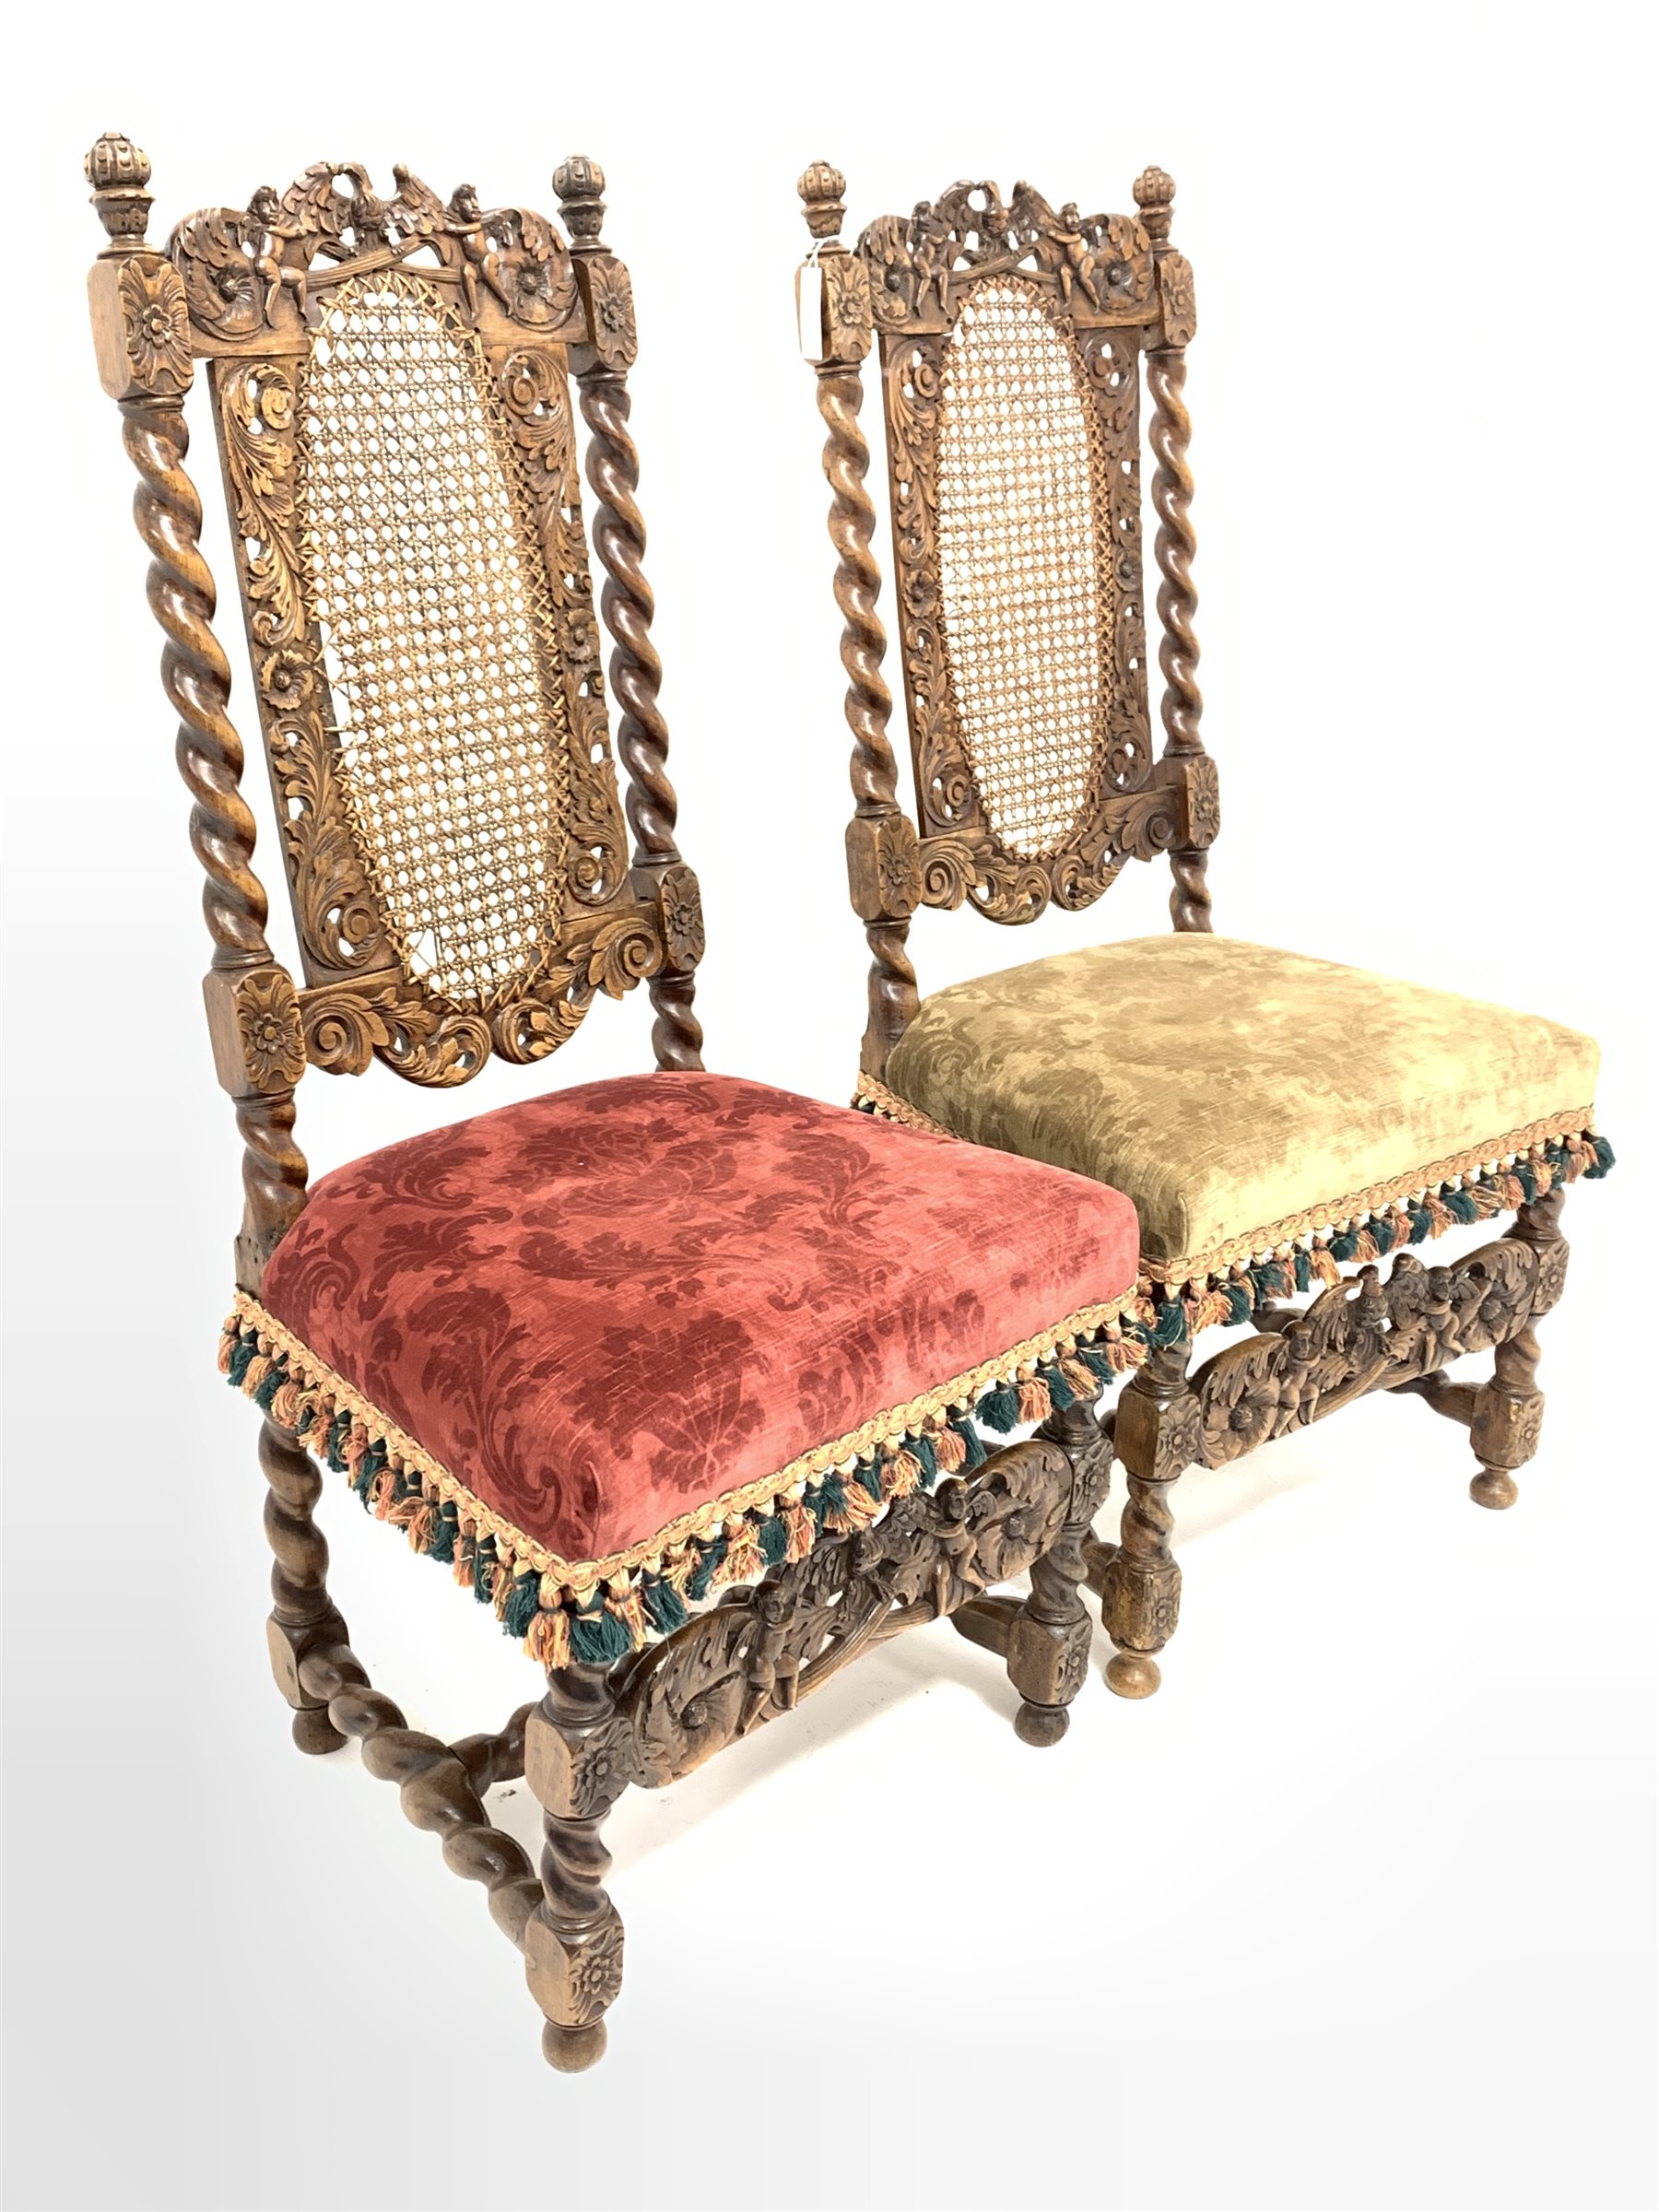 Pair of 19th century Carolean style walnut chairs - Image 2 of 5